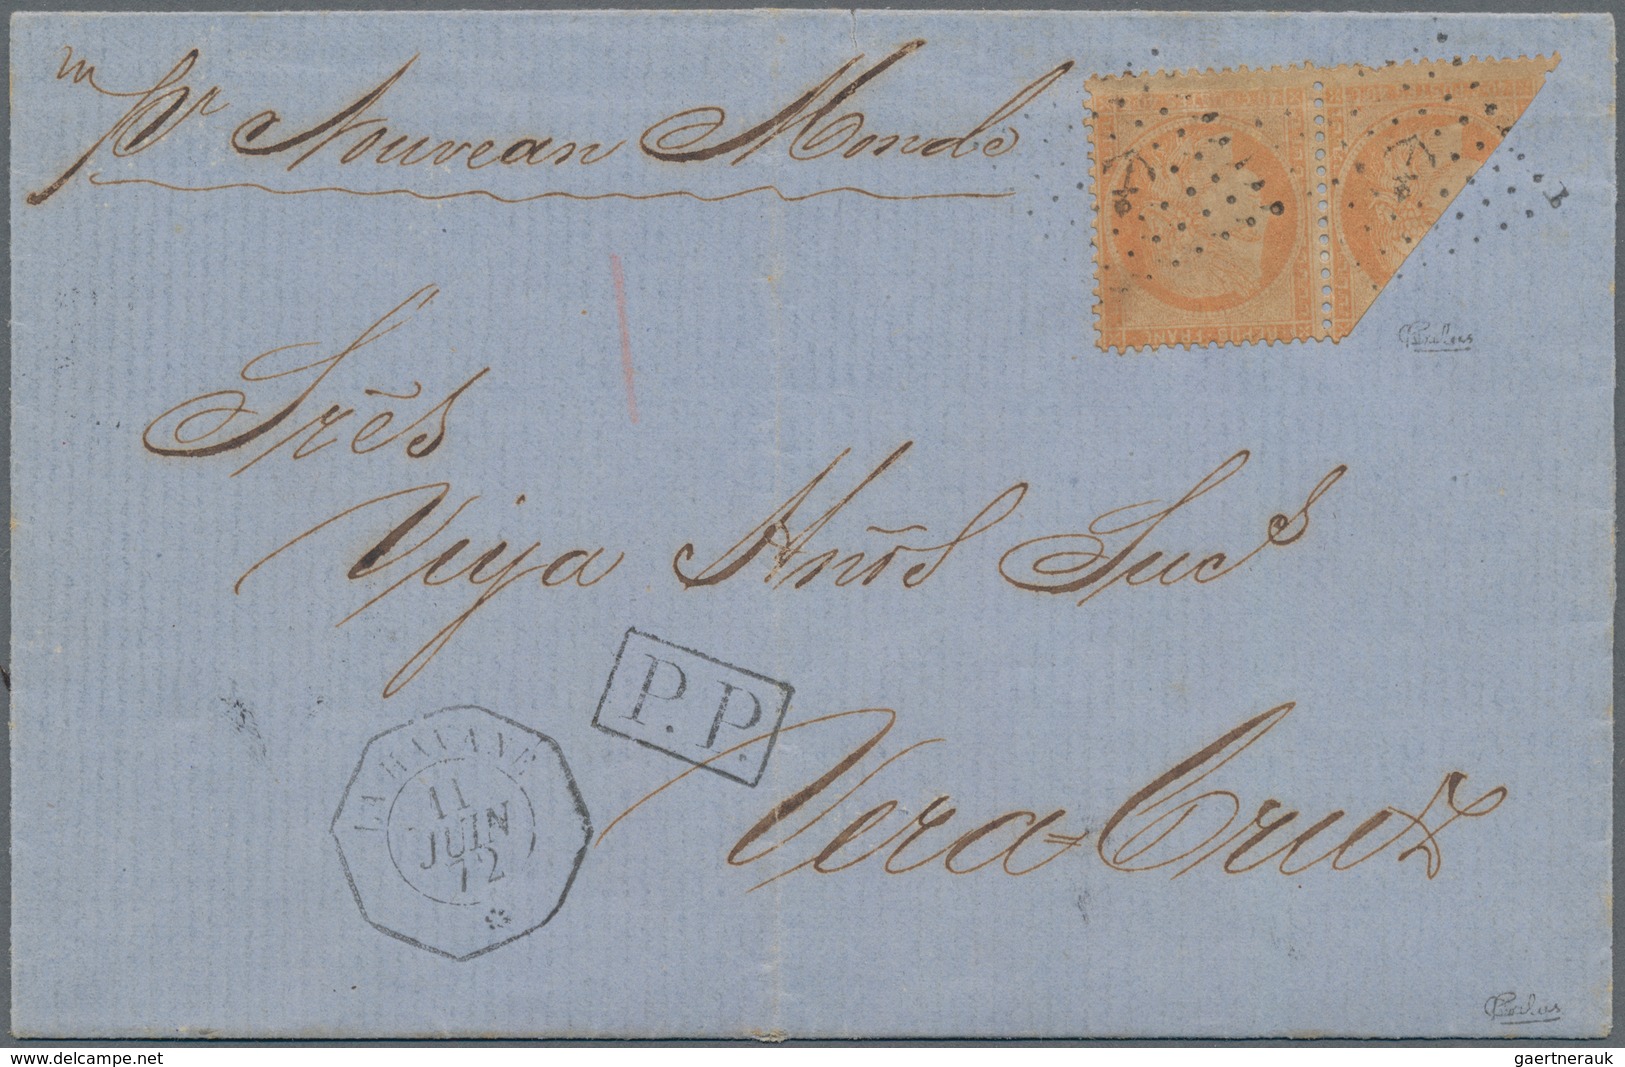 Frankreich: 1870 French Ceres 40c. Orange BISECTED Diagonally, Used In Pair With Complete Stamp On F - Ungebraucht